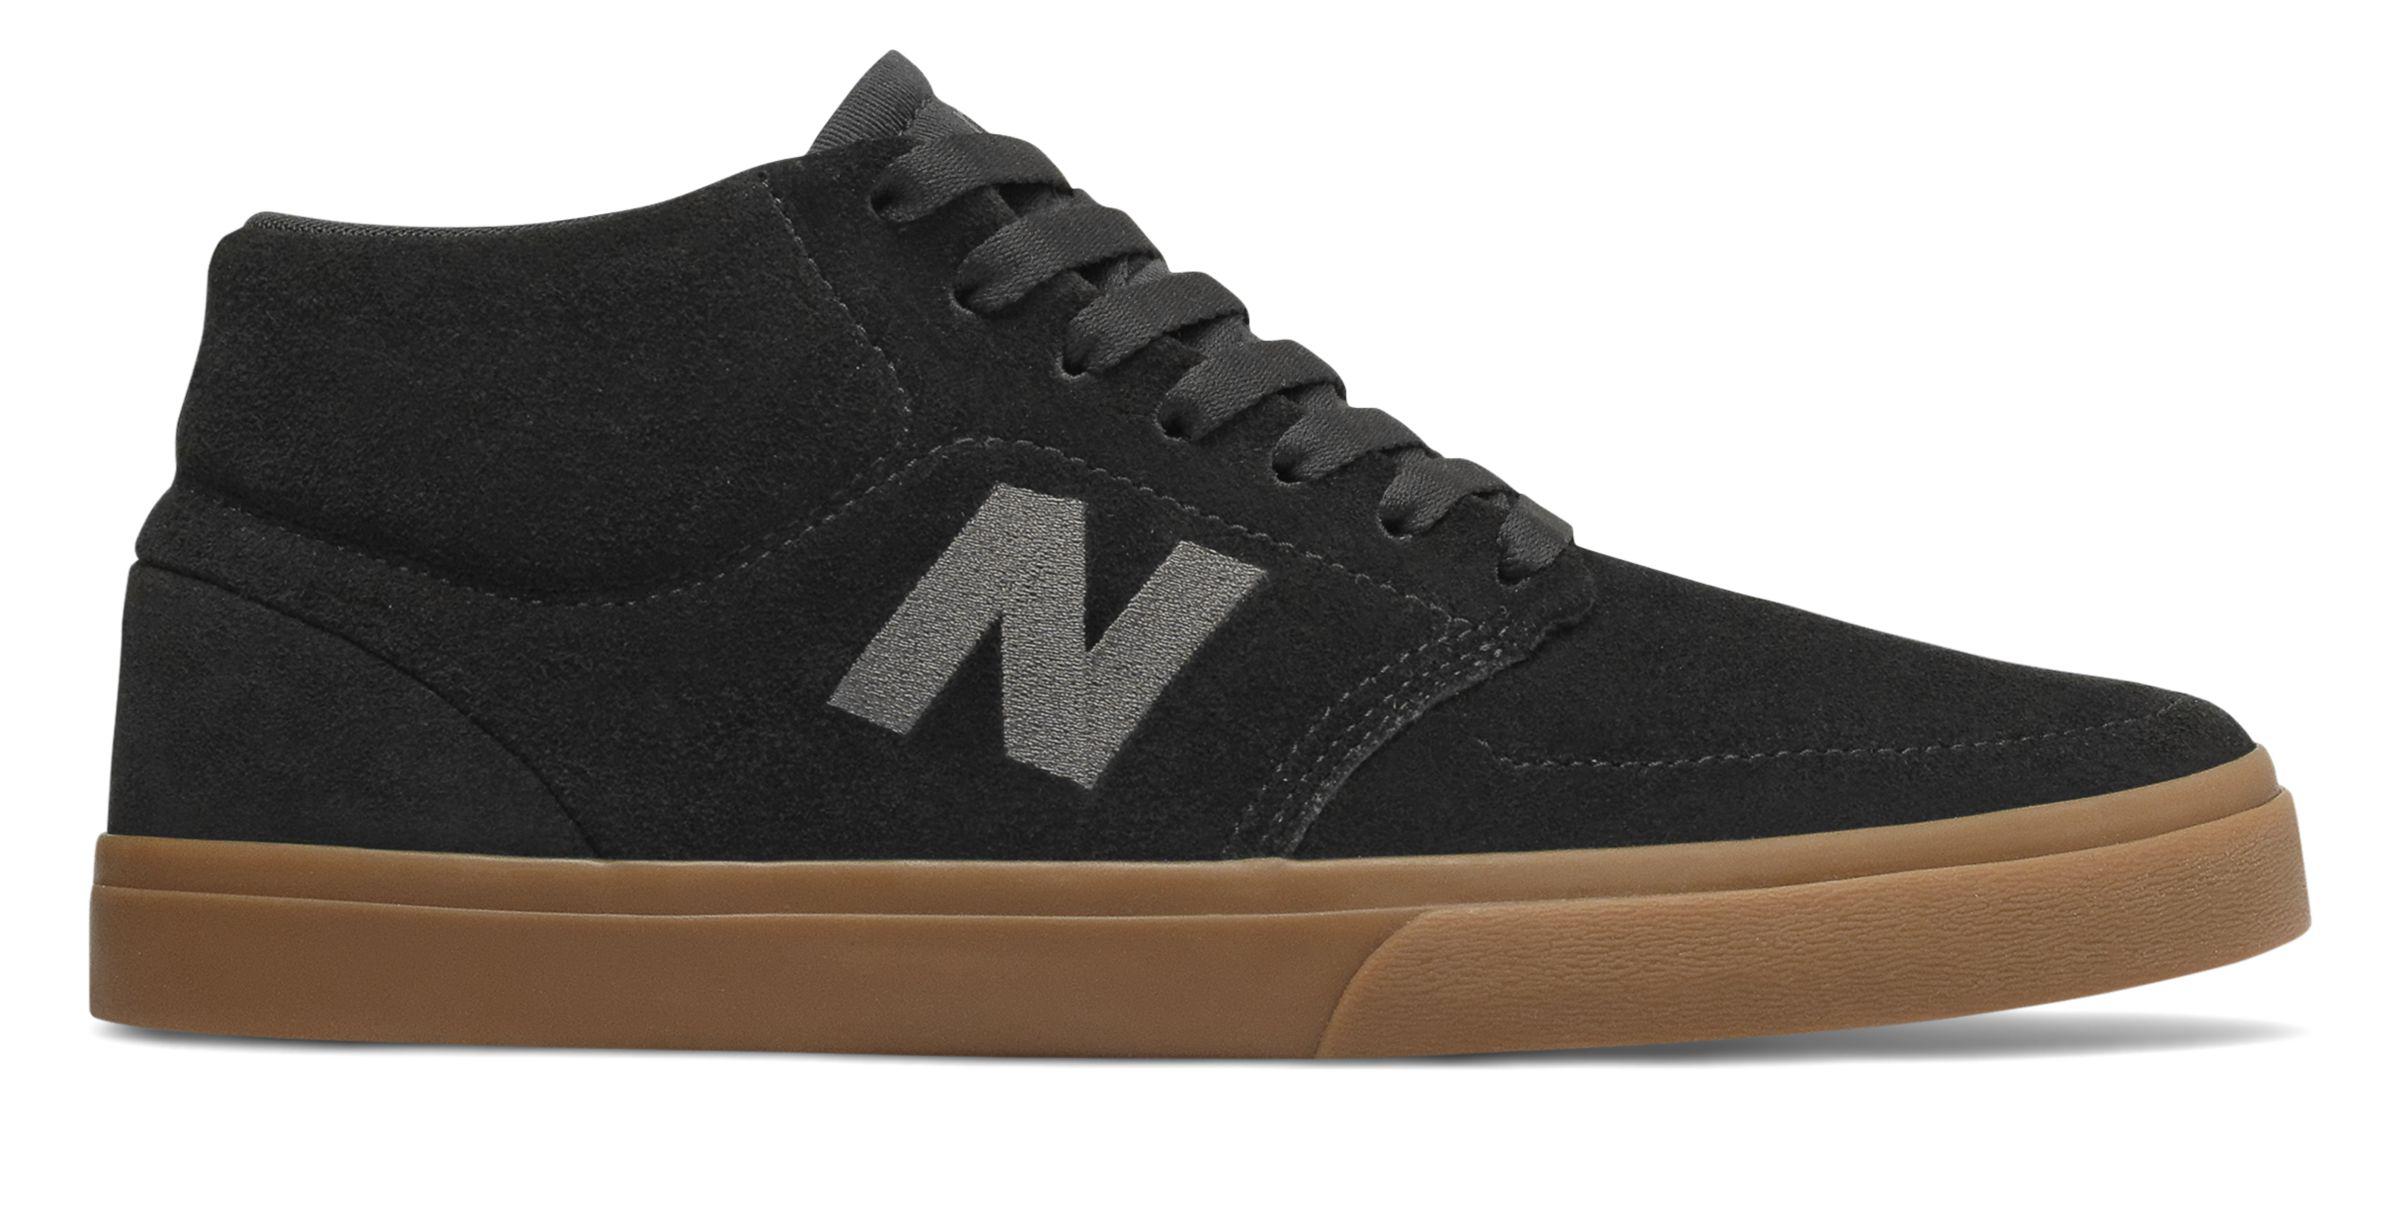 New Balance Suede Numeric 346 in Black 